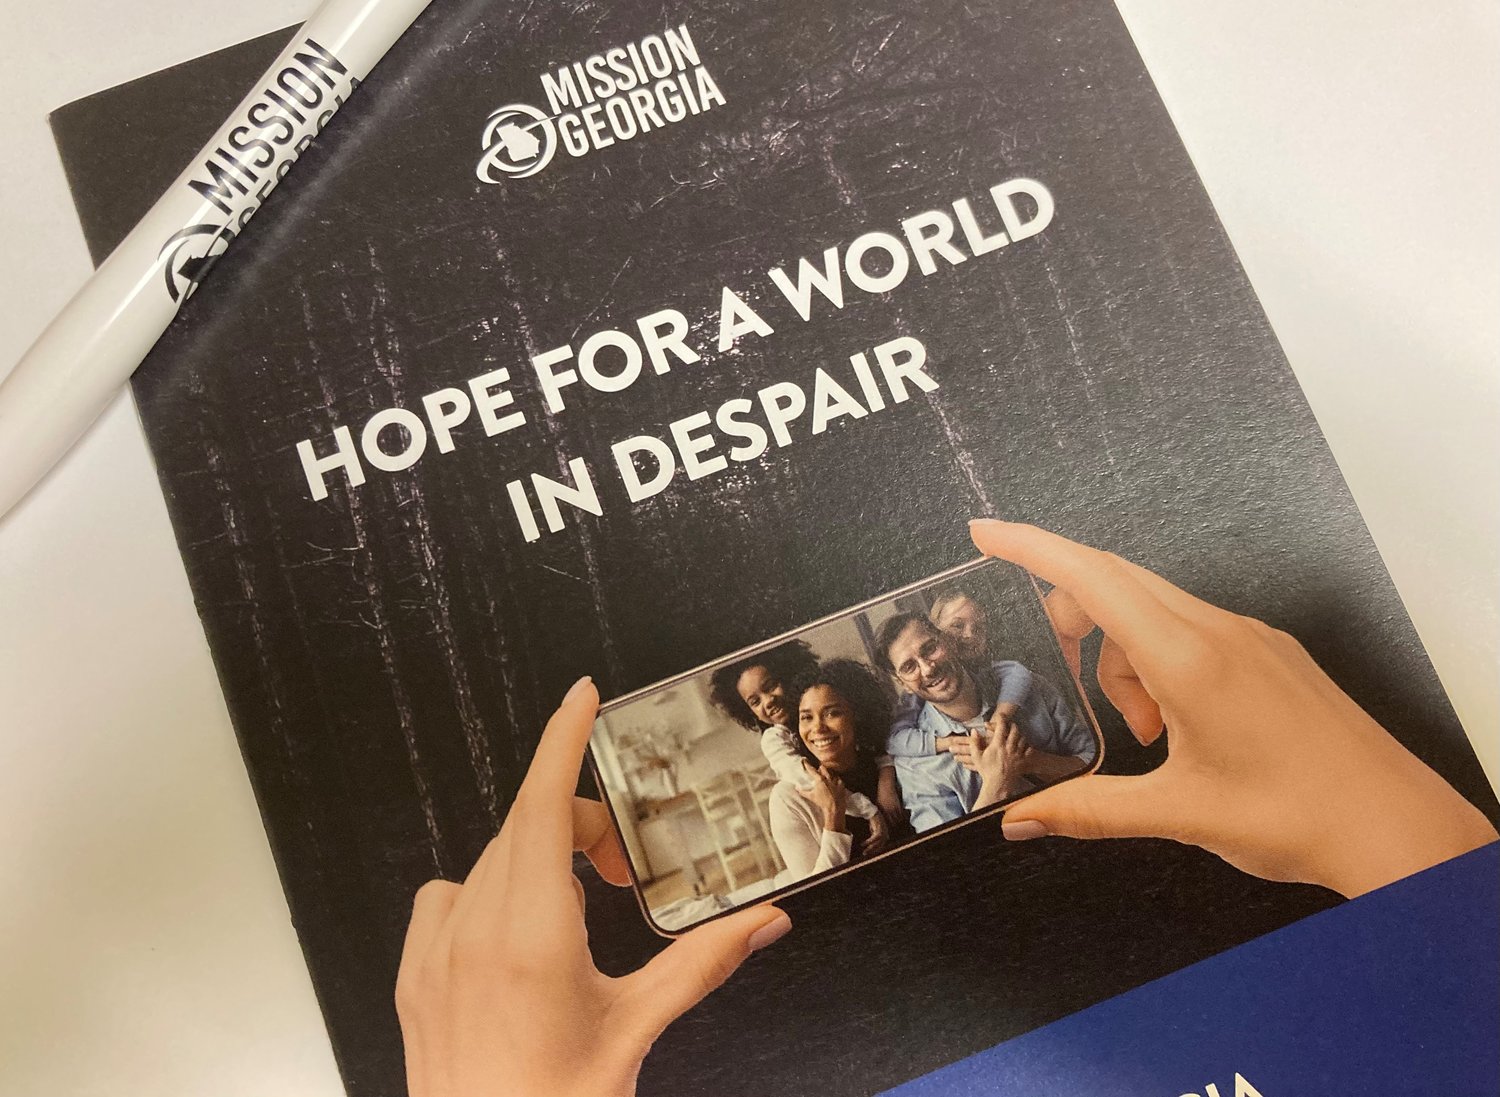 Snapshot shows a pen and flyer used to promote the Mission Georgia offering. September has been set aside by the Georgia Baptist Convention as the month for promoting the special offering.